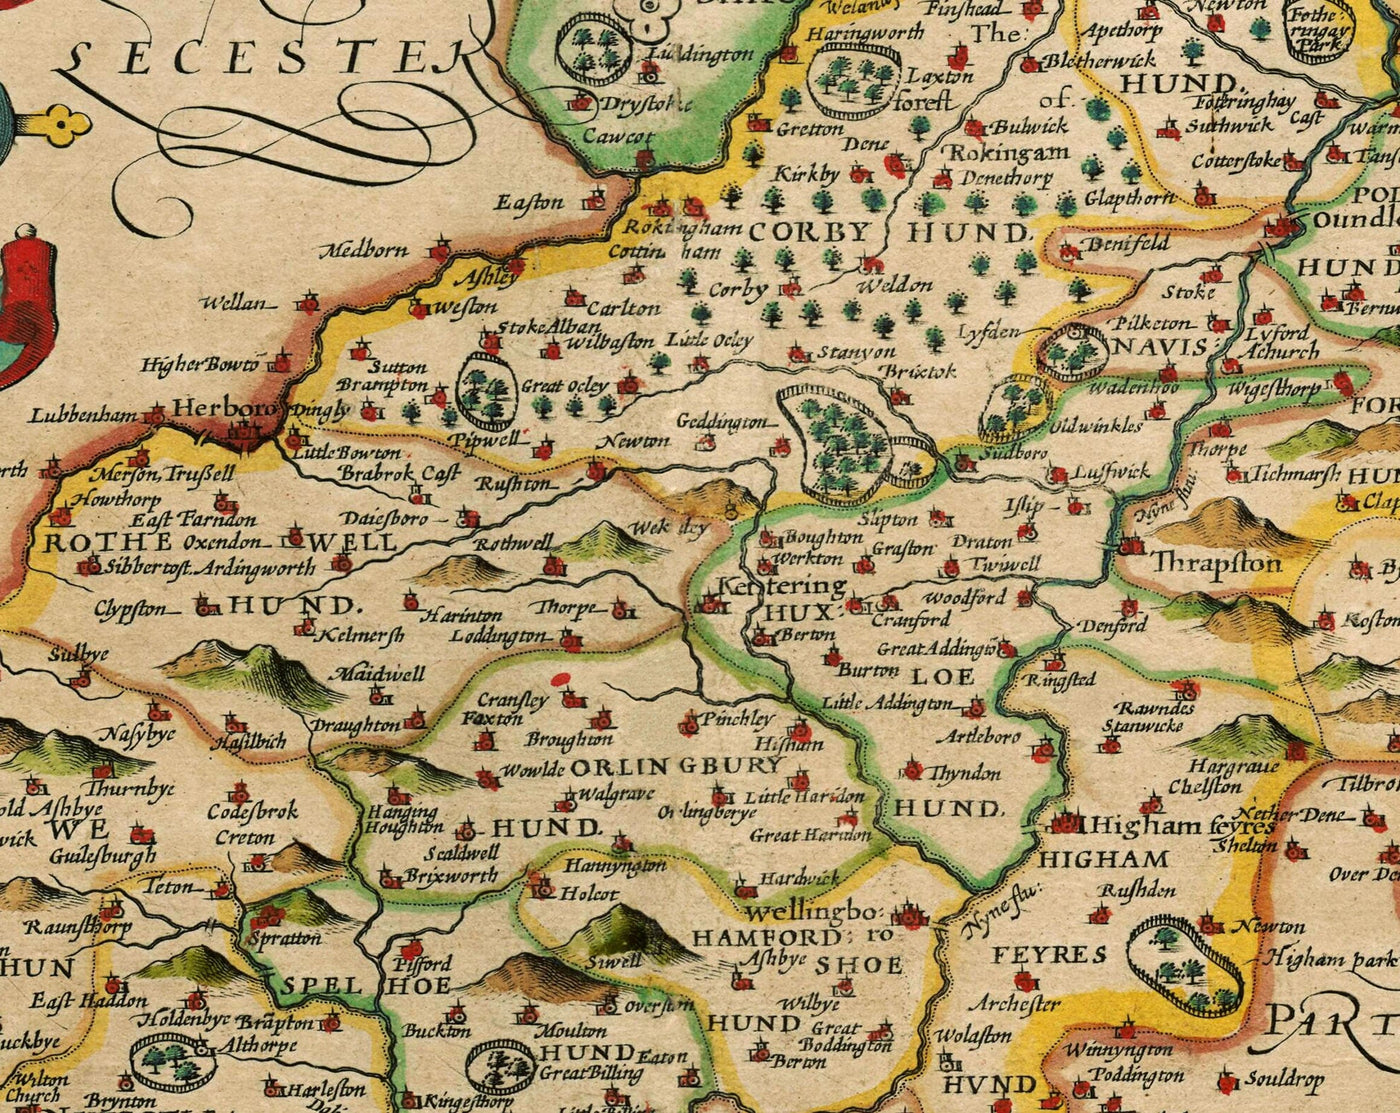 Old Map of Northamptonshire, 1611 by John Speed - Northampton, Kettering, Peterborough